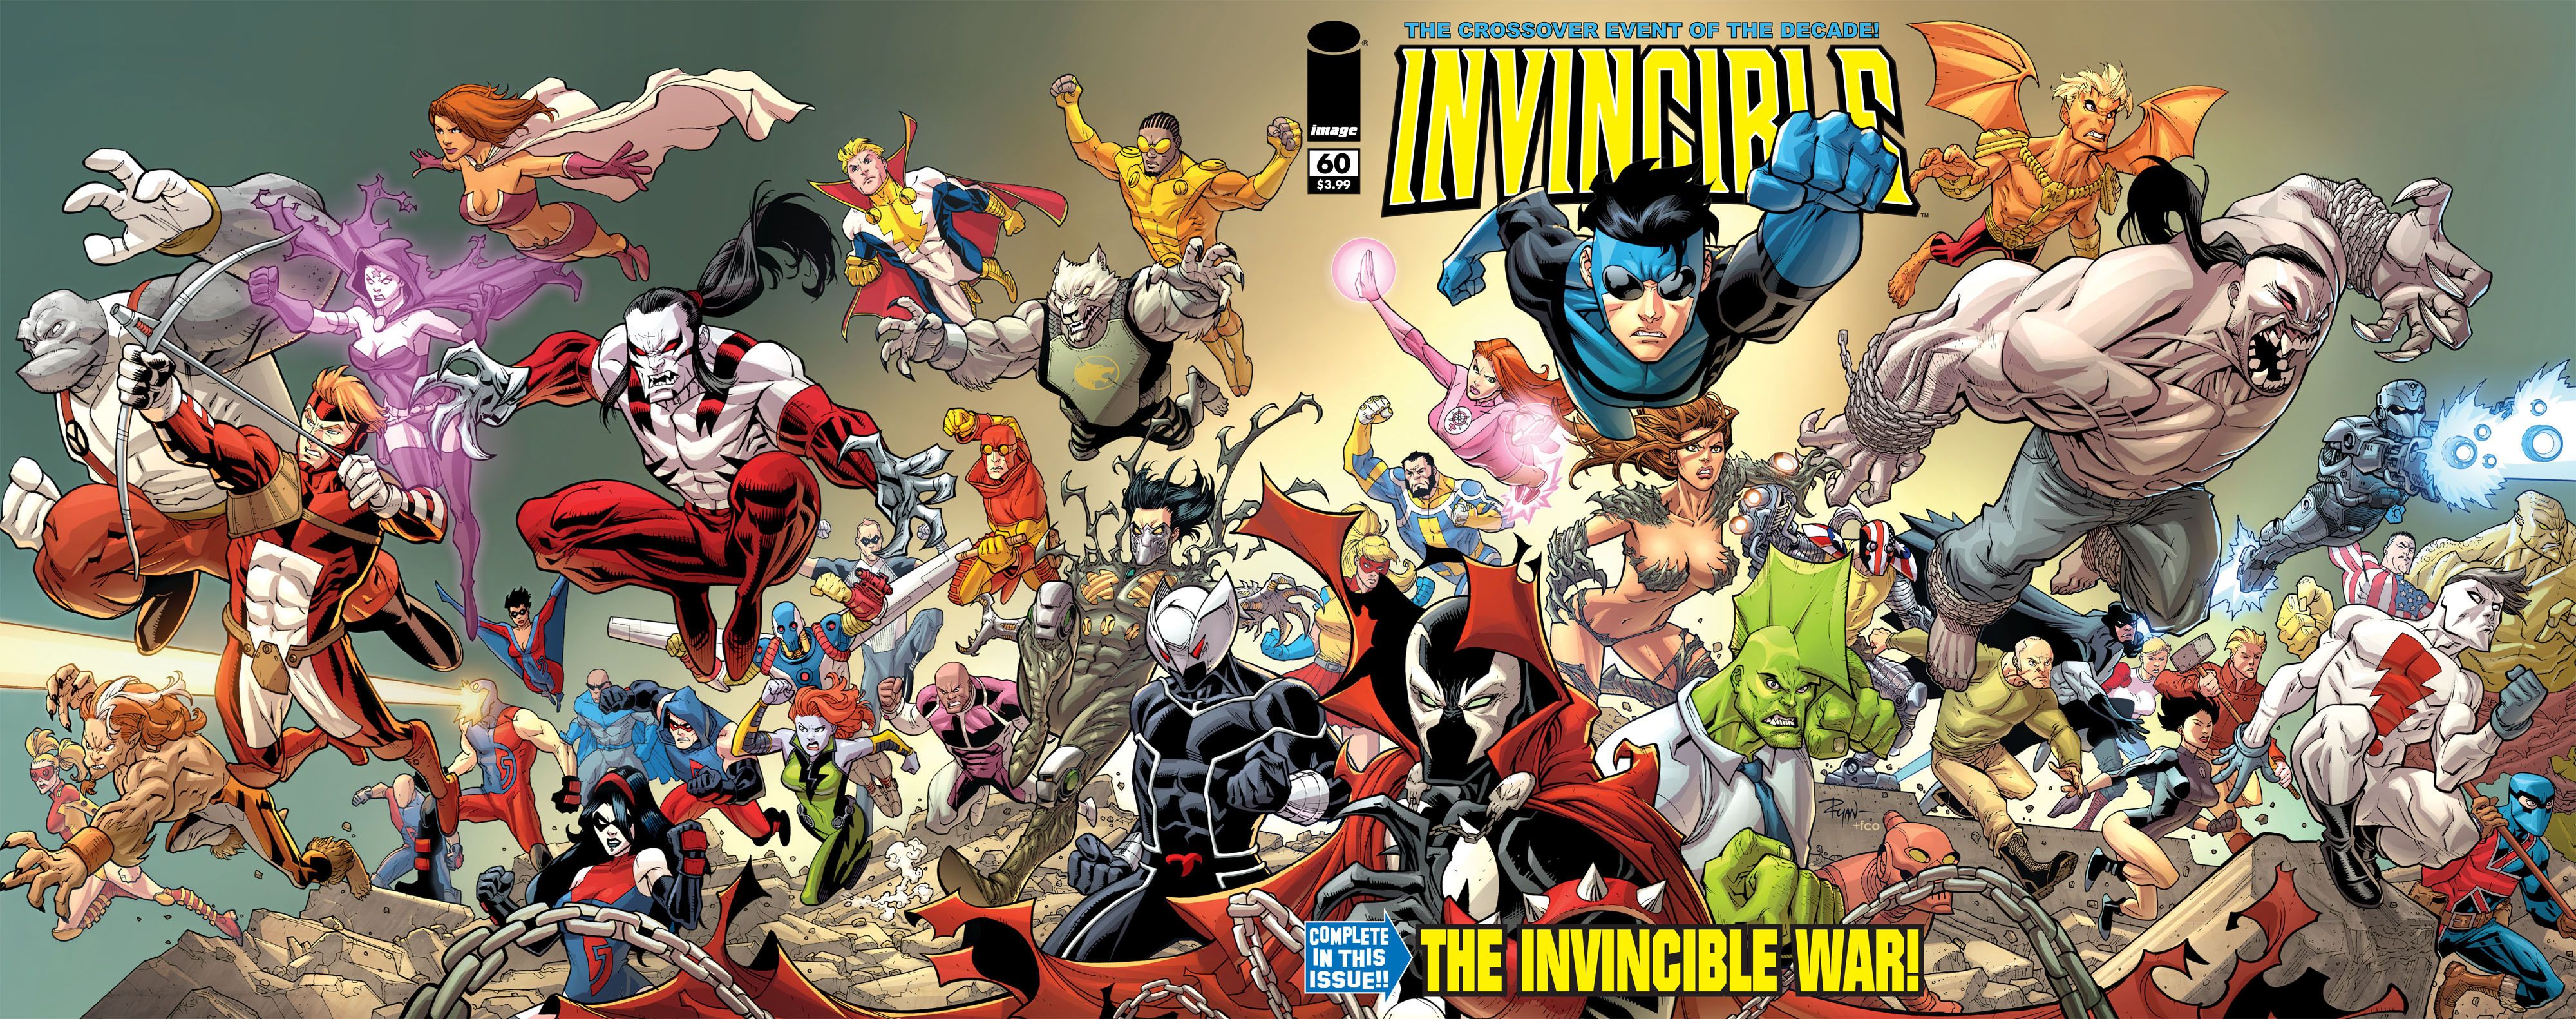 Invincible’s Apocalyptic ‘THE INVINCIBLE WAR’ Is Impossible to Adapt Without Huge Changes